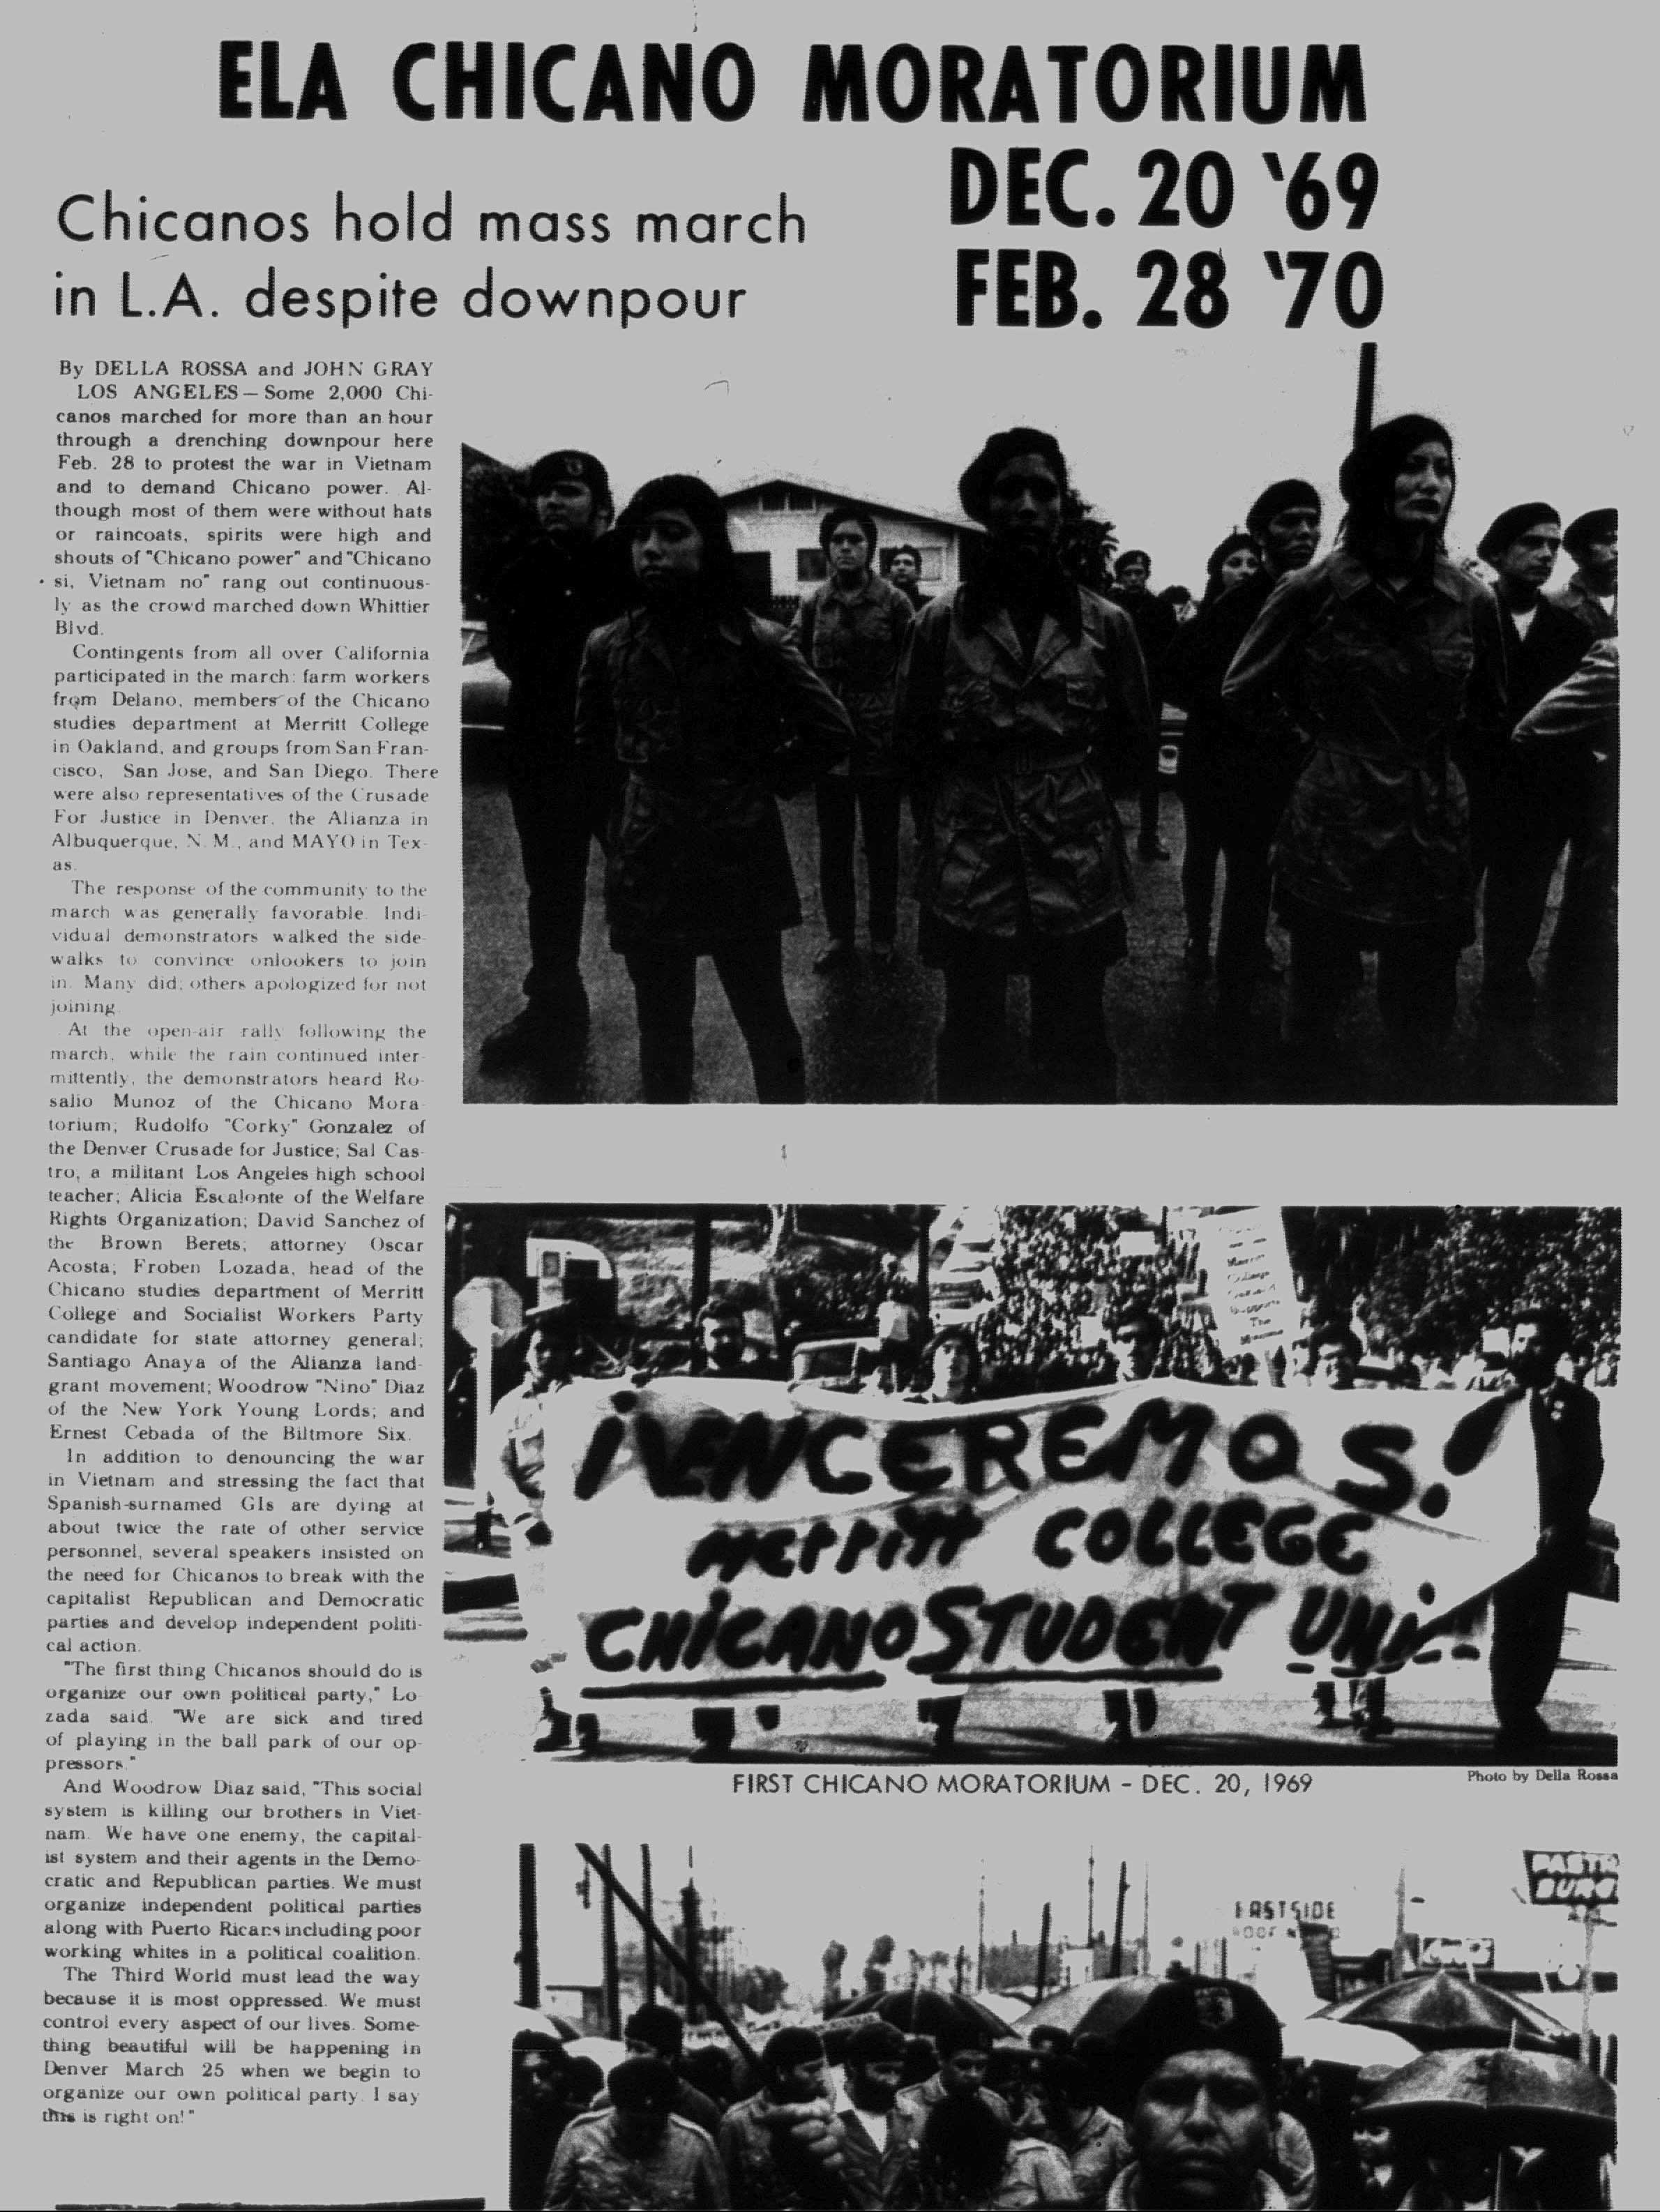 A newspaper article on the Chicano Moratorium,  with the headline, "ELA Chicano Moratorium, Dec. 20 '69, Feb. 28 '70. Chicanos hold mass march in L.A. despite downpour."